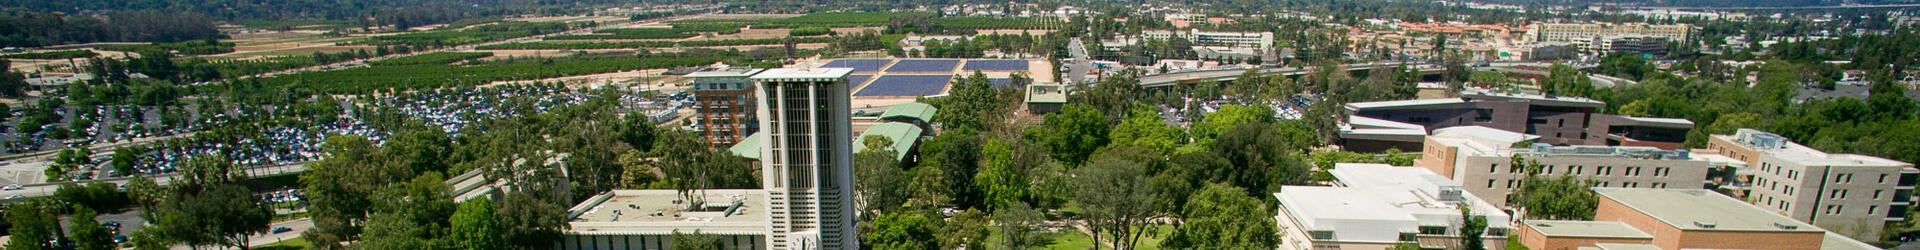 ucr aerial view